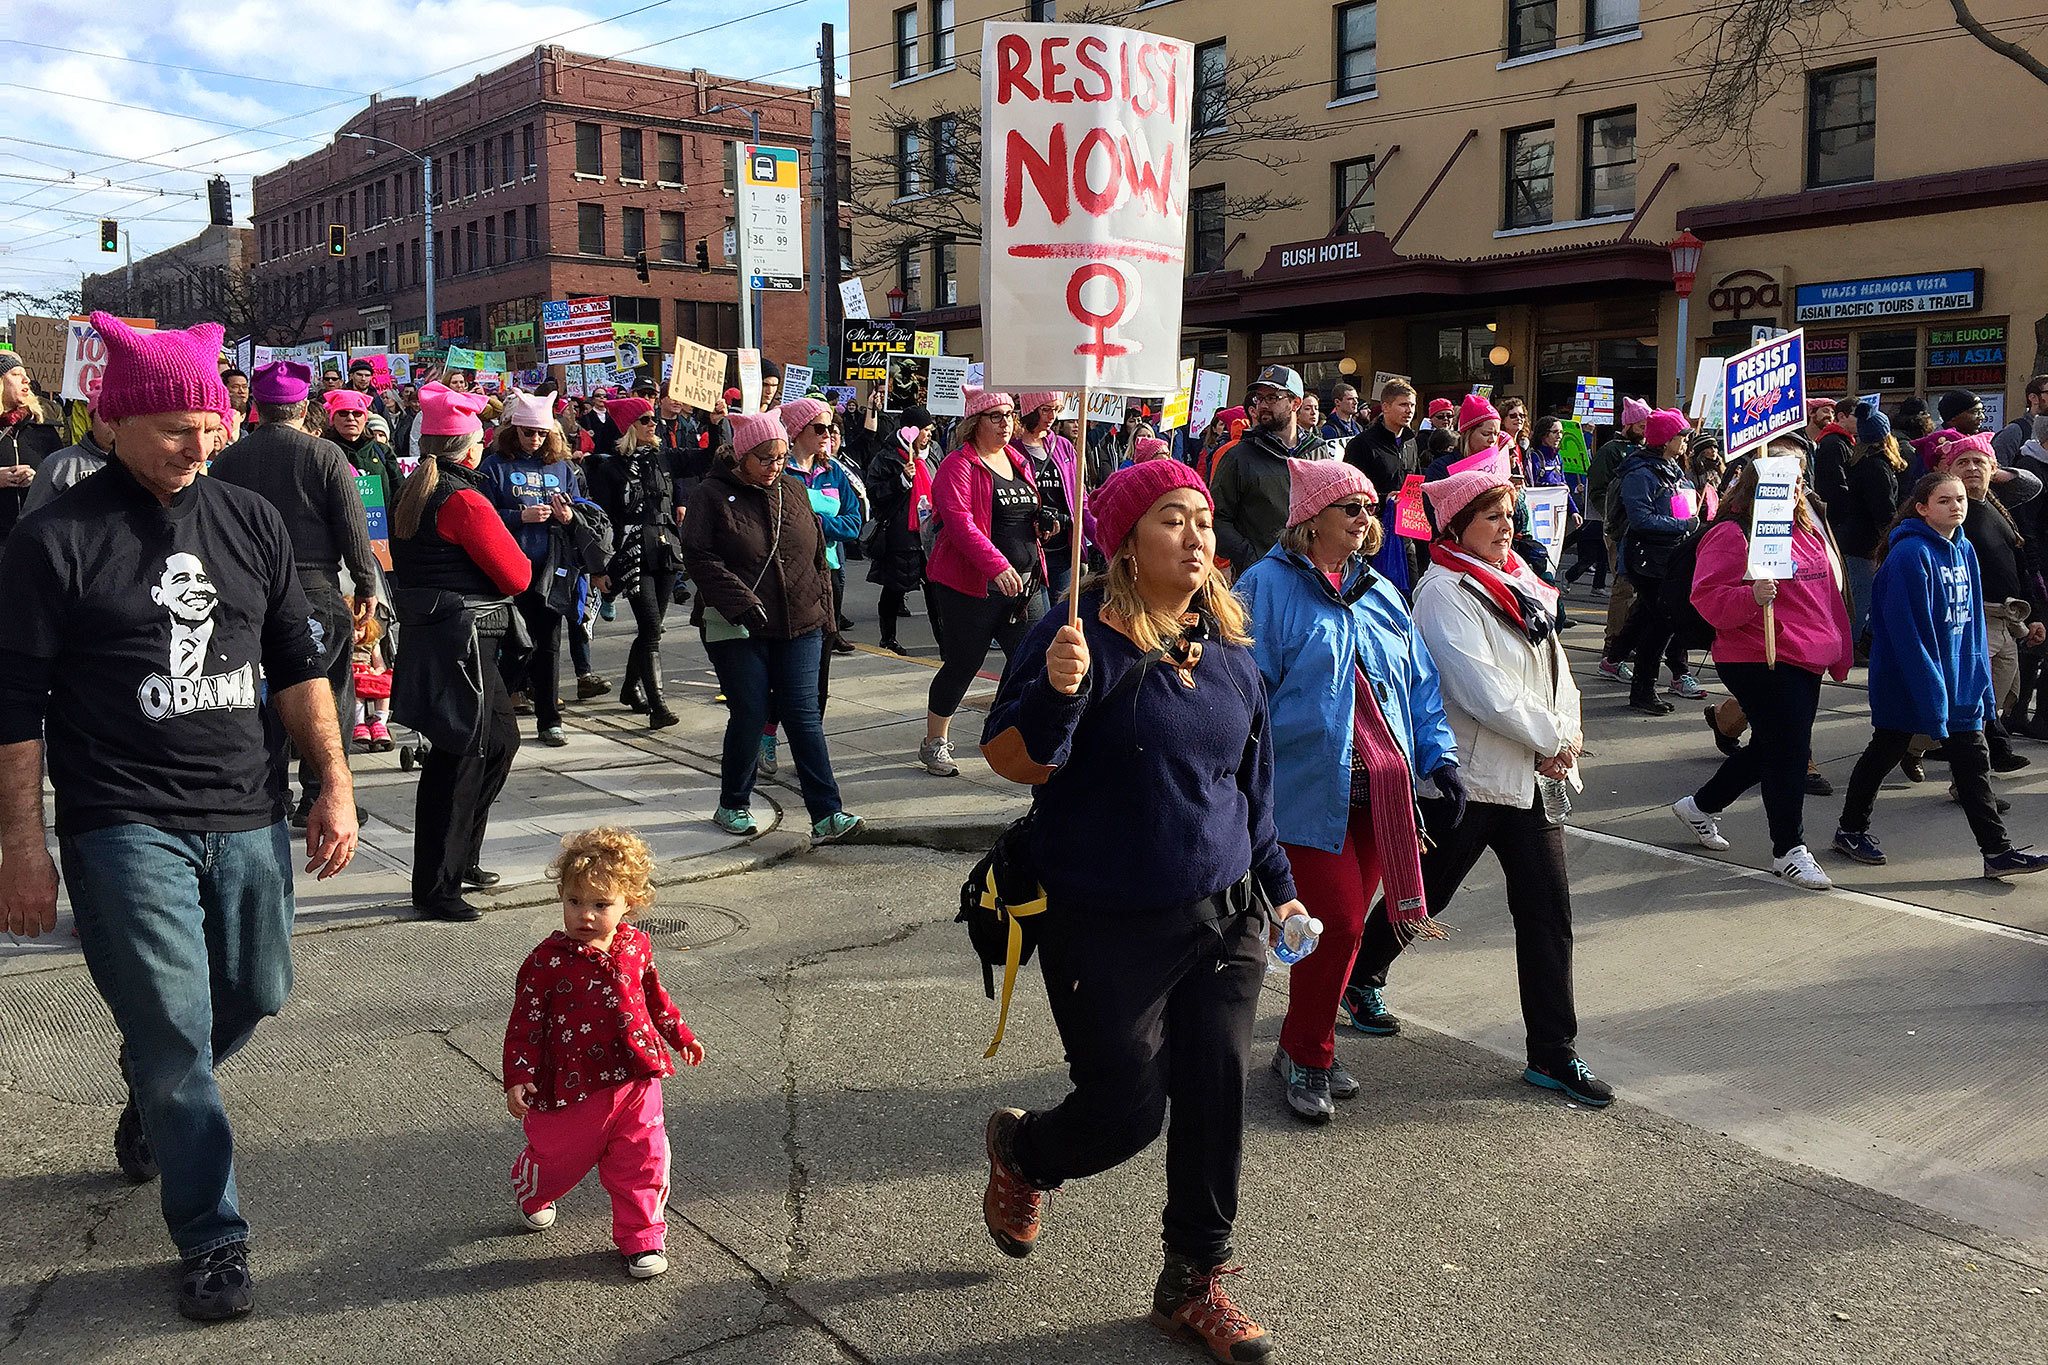 Seattle Womxn’s March attracted an estimated 125,000 people protesting the changes the Trump Administration is proposing that will impact women’s healthcare, environmental funding and more. Photos by Sara Bernard / Sound Publishing